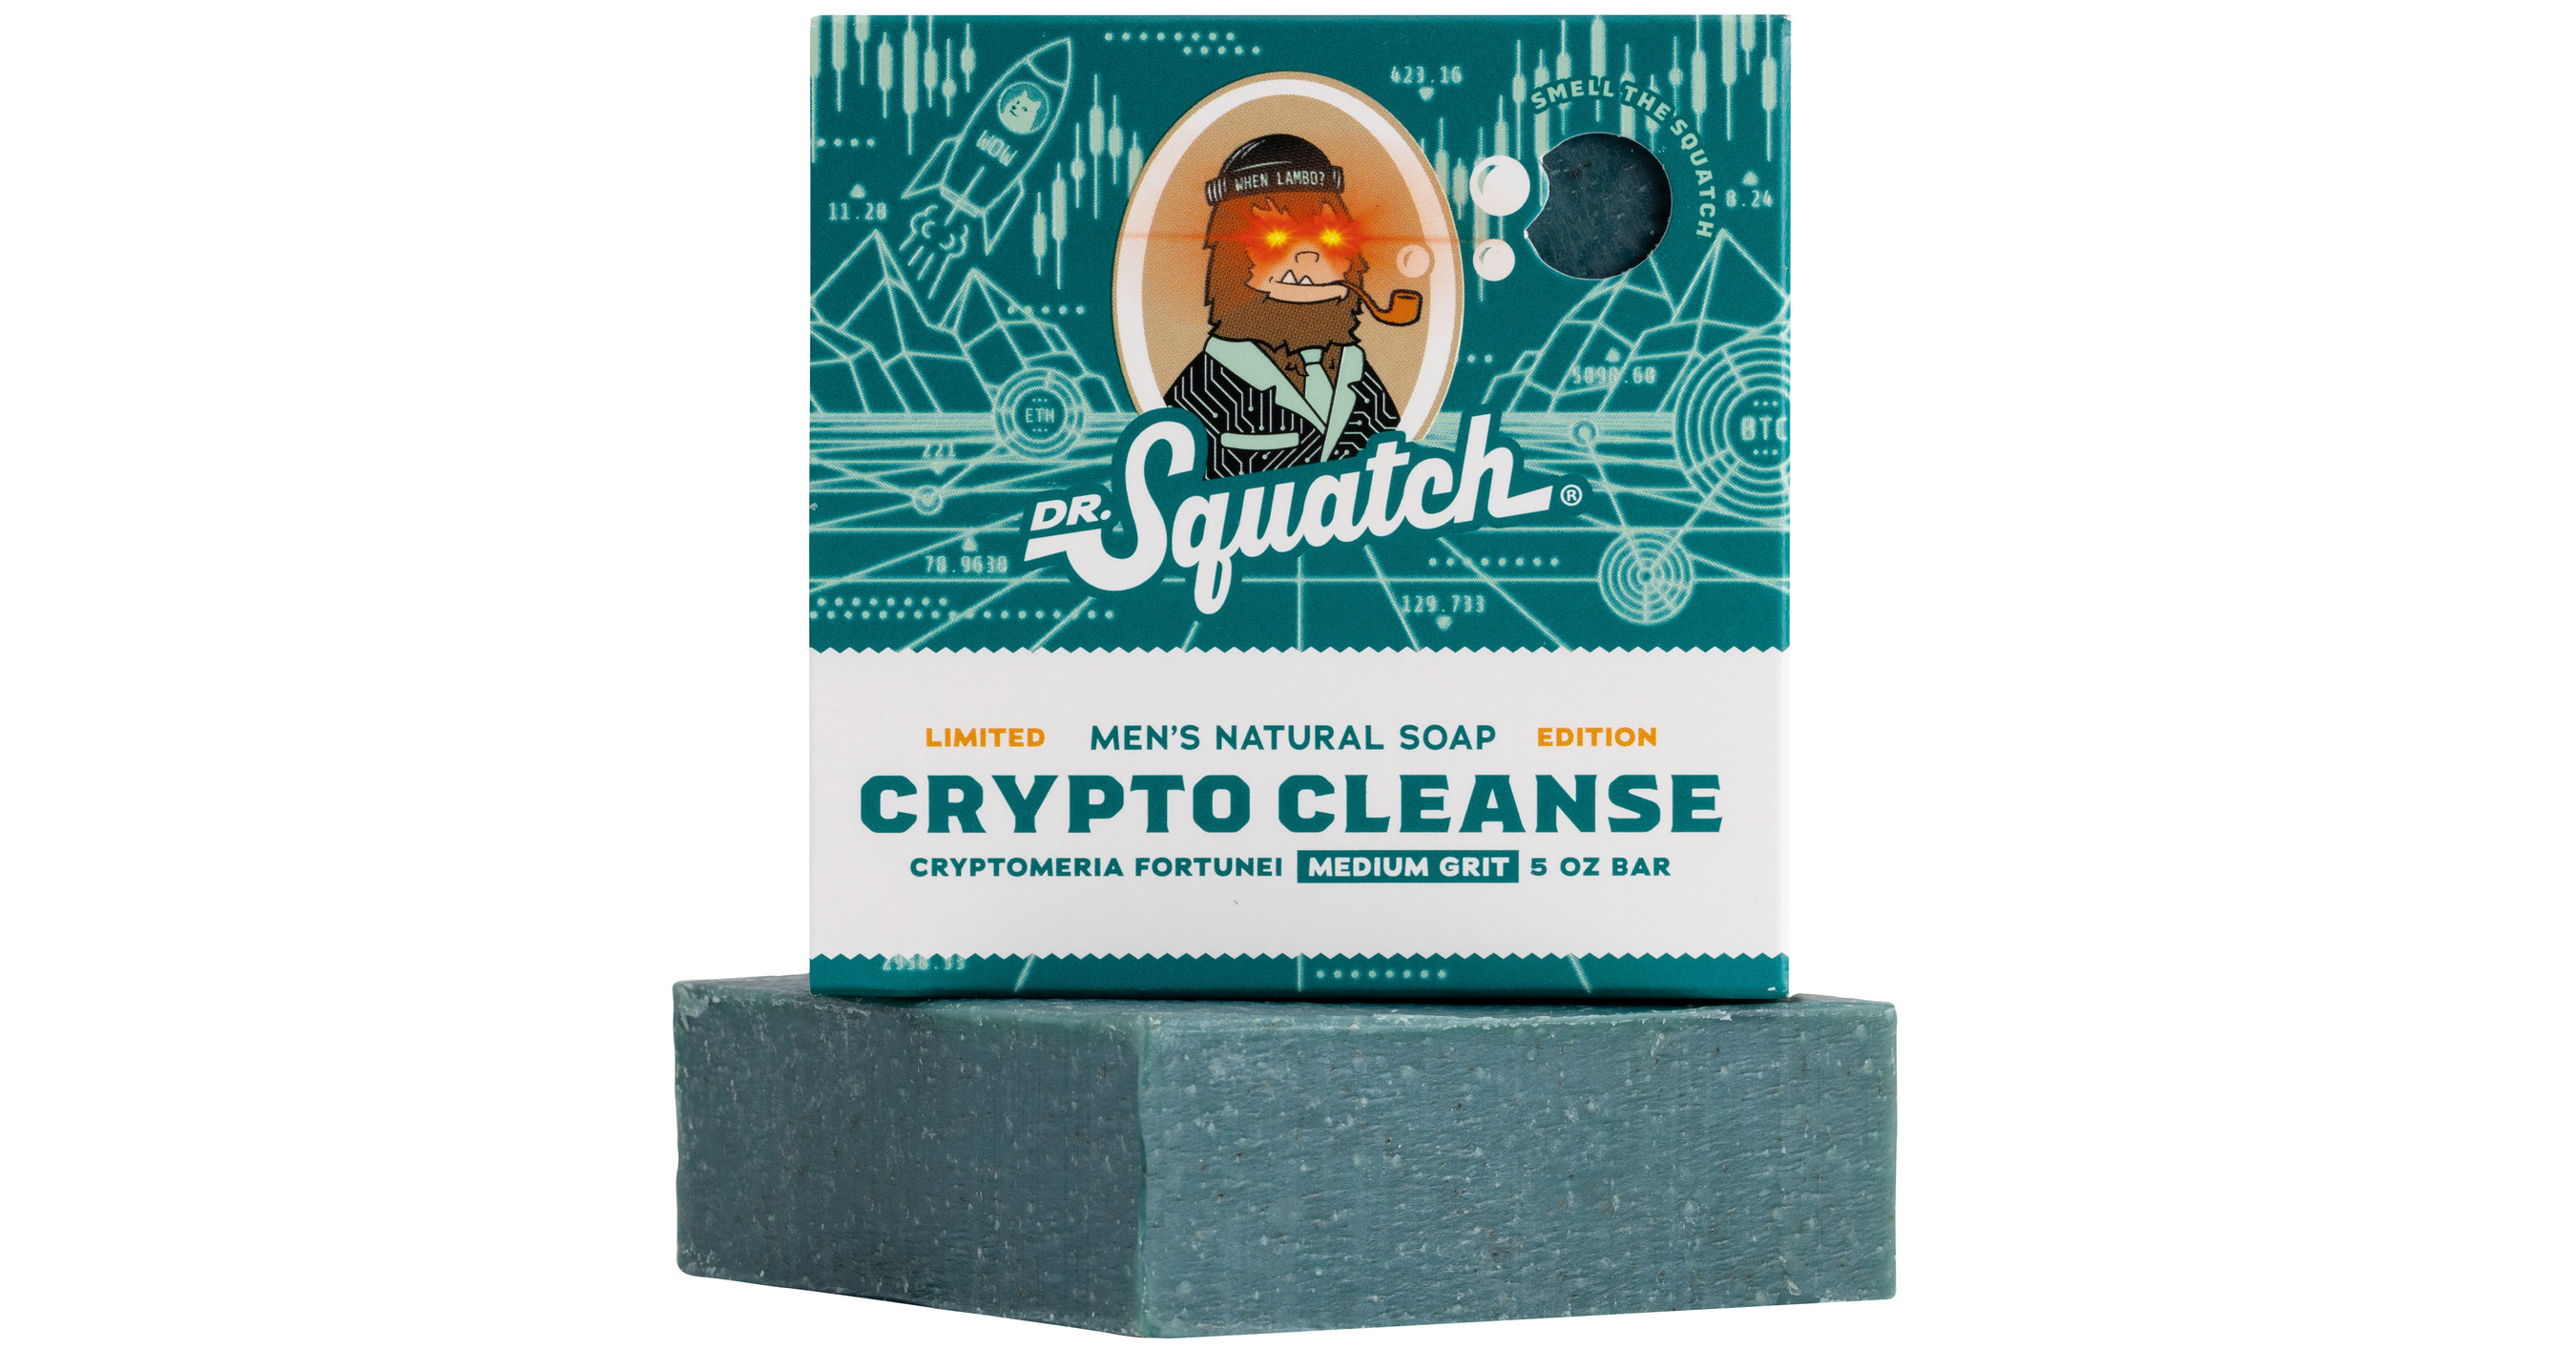 Dr. Squatch Aims to Clean Up the Metaverse with New Limited